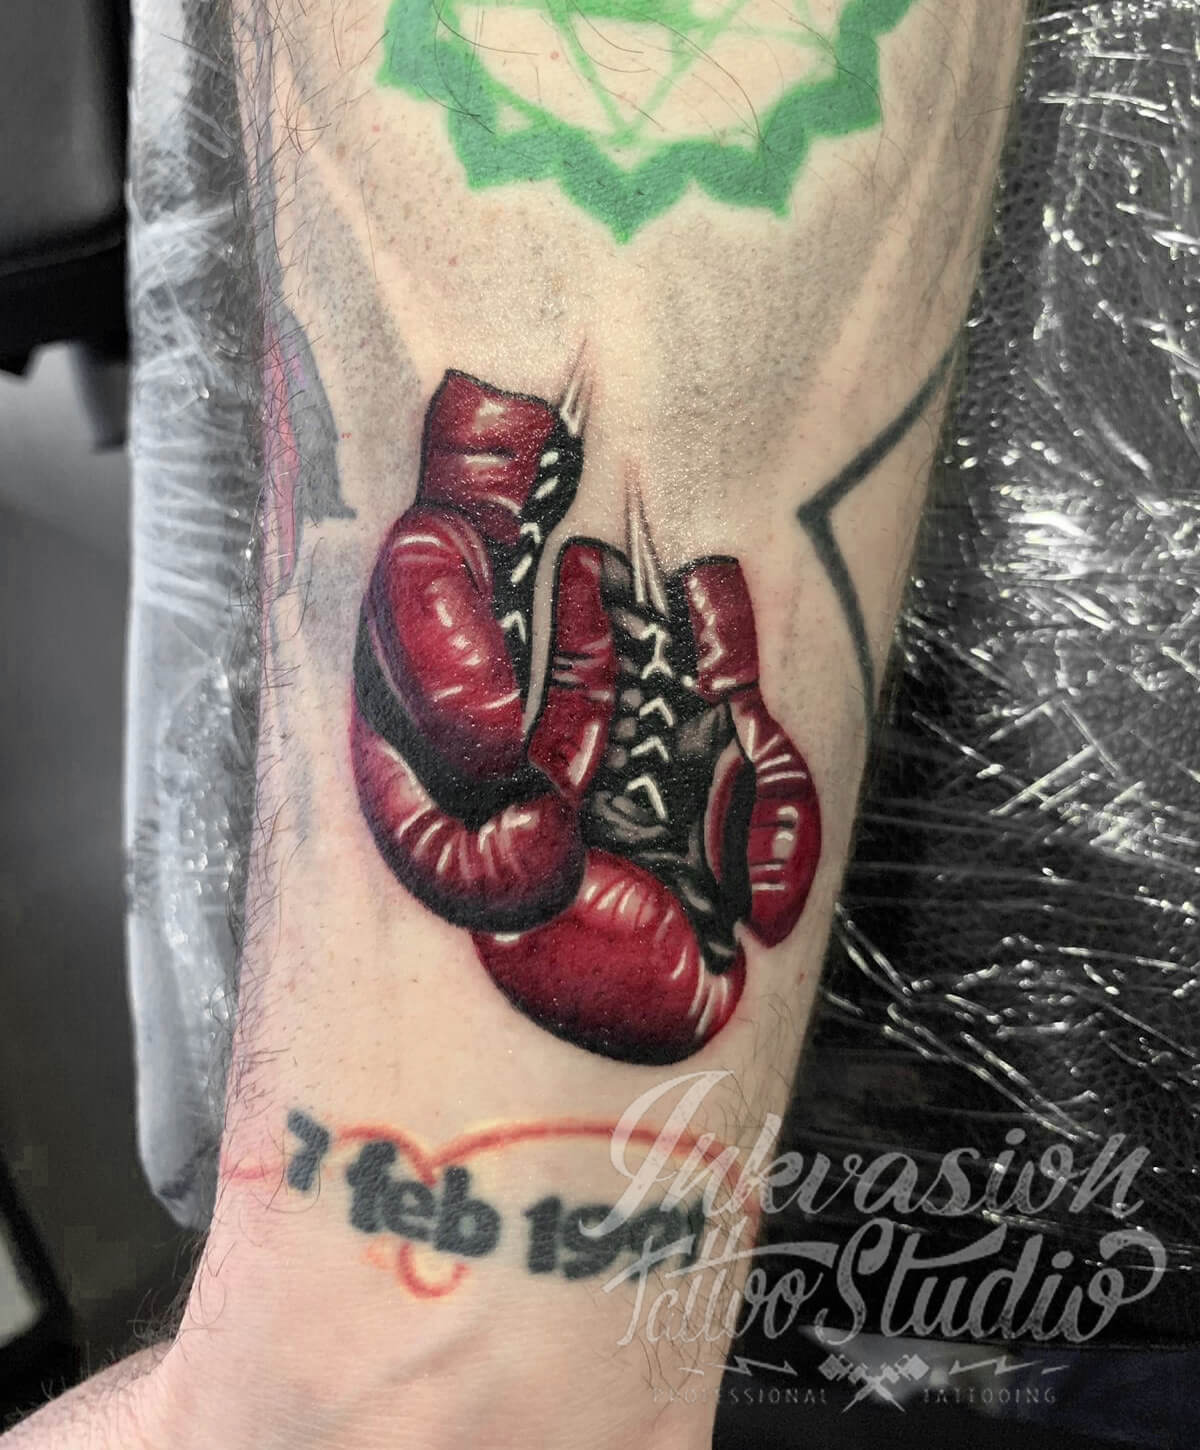 Microrealistic boxing gloves tattoo done on the inner